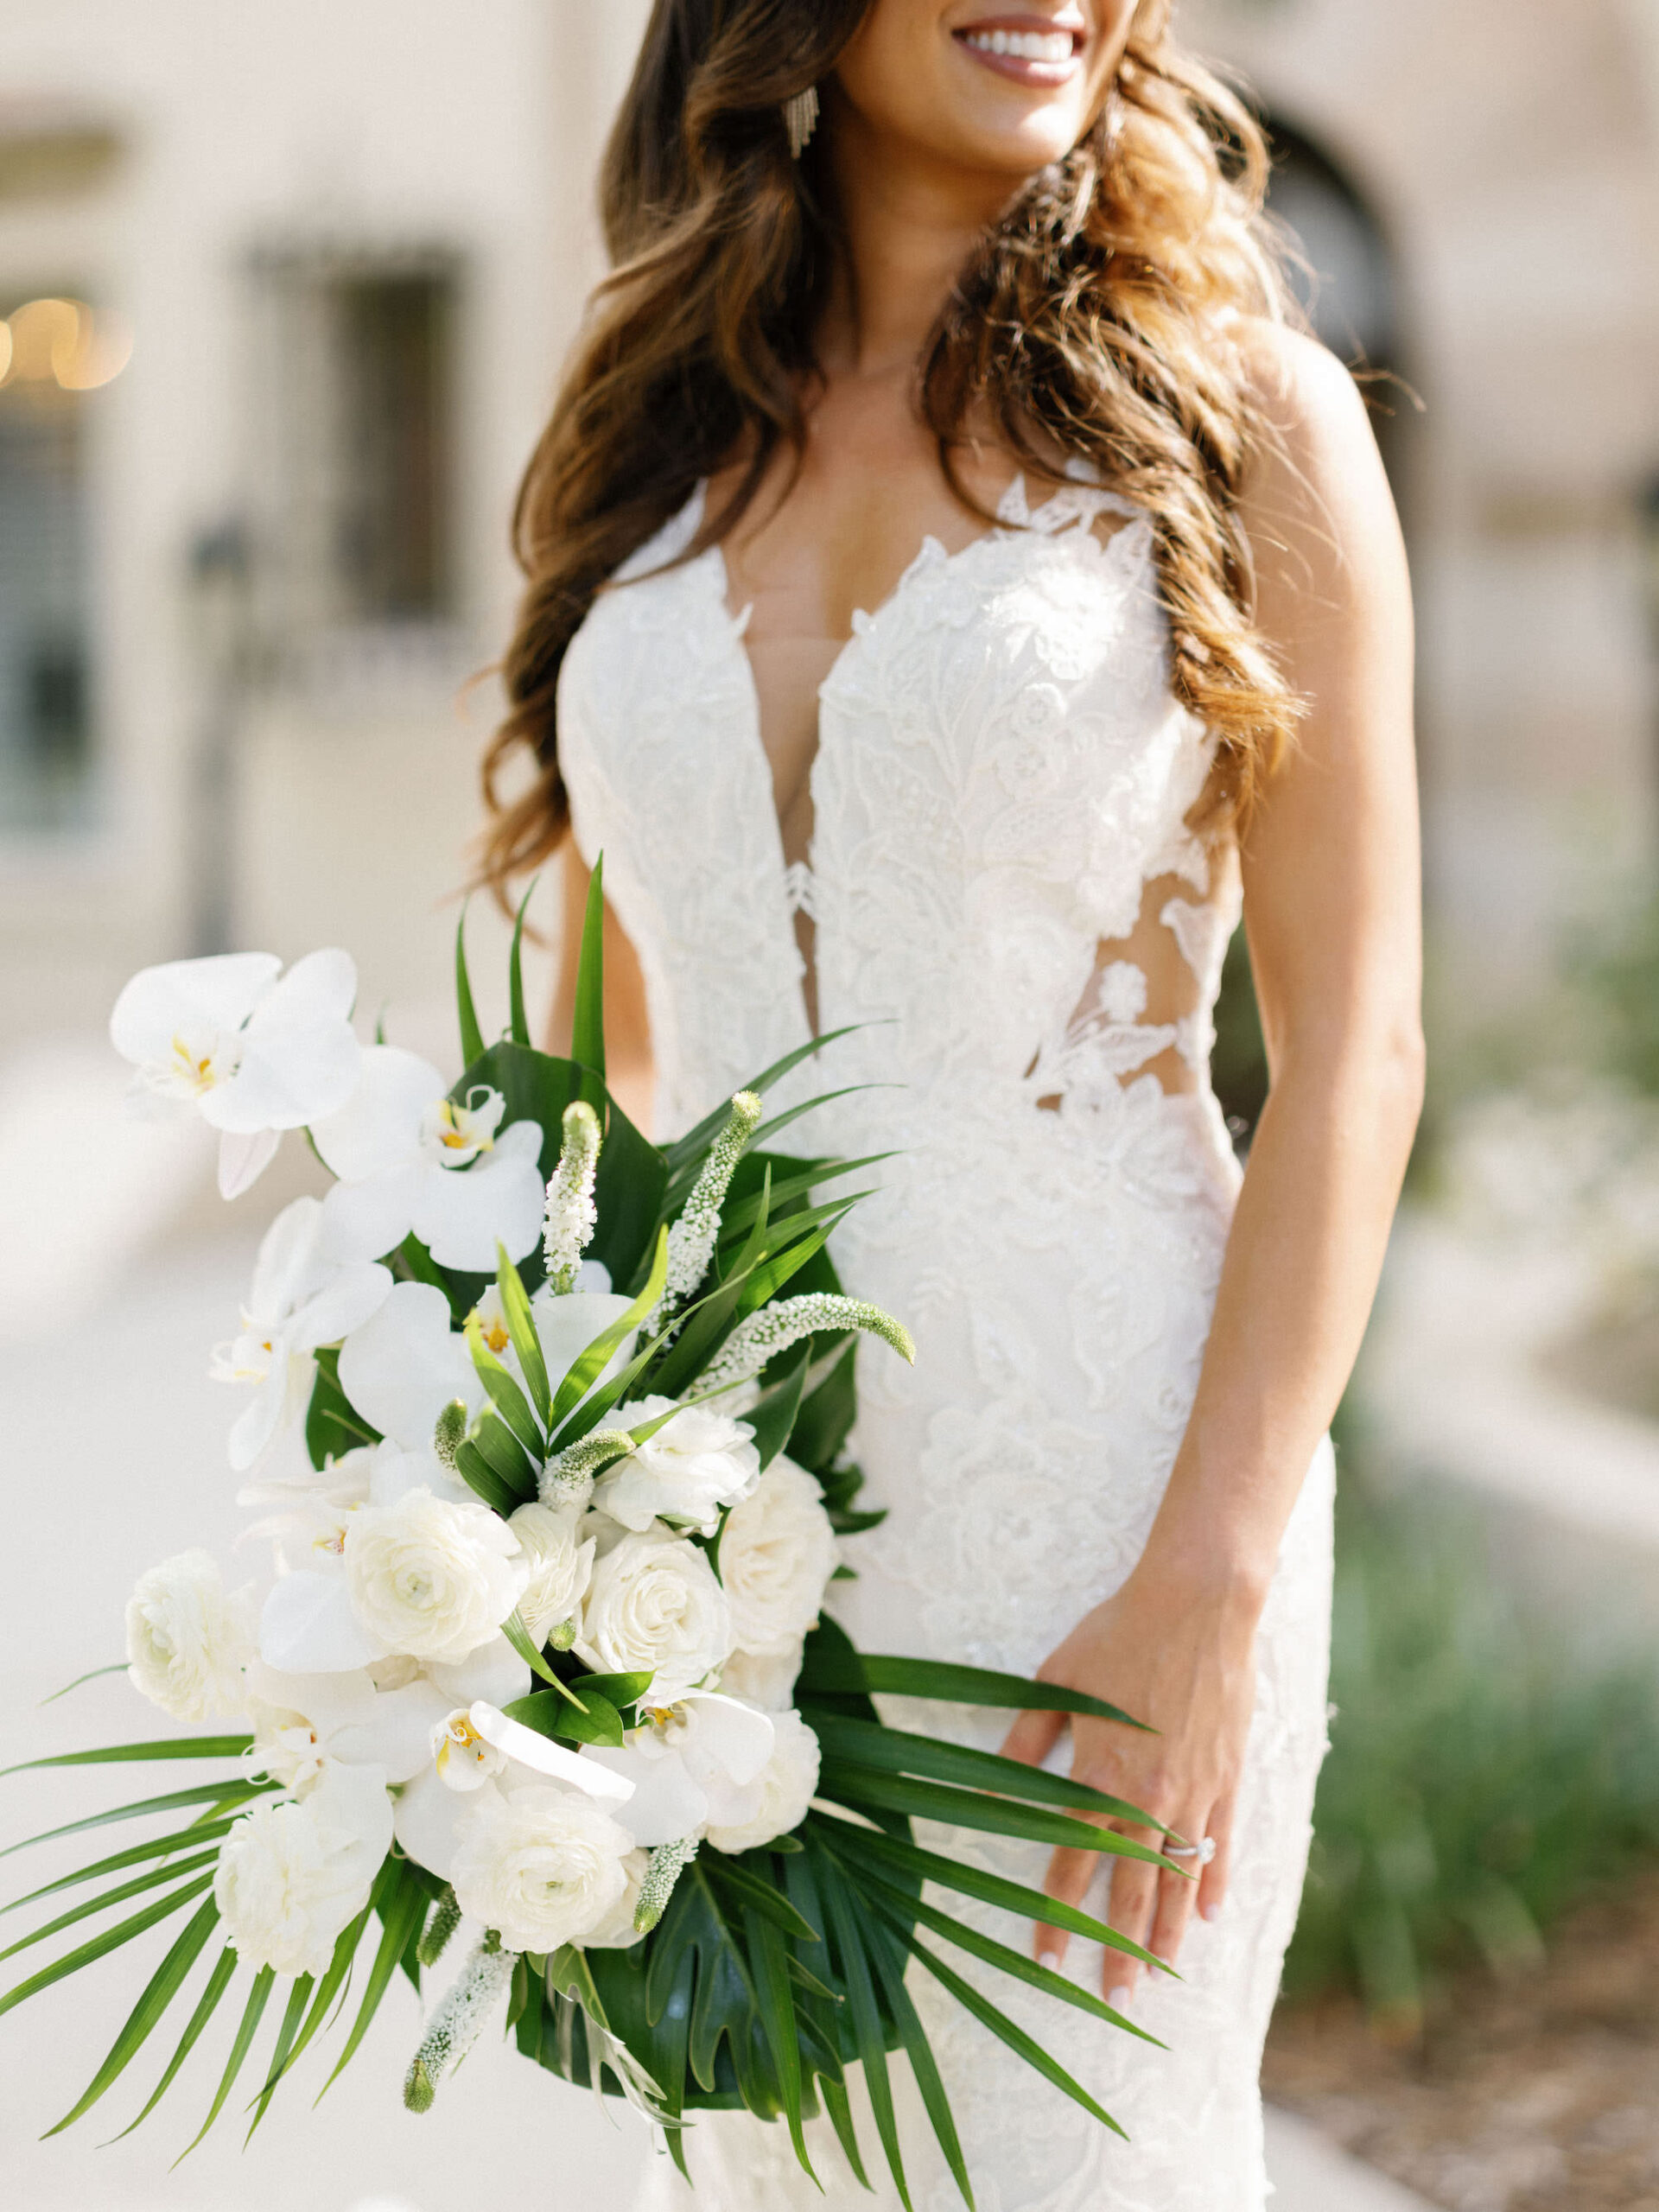 Luxurious Bride Wearing Lace and Illusion Wedding Dress Holding Classic Tropical White Roses and Orchids Flowers with Monstera Leaves and Palm Fronds | Tampa Bay Wedding Florist Botancia International Design Studio